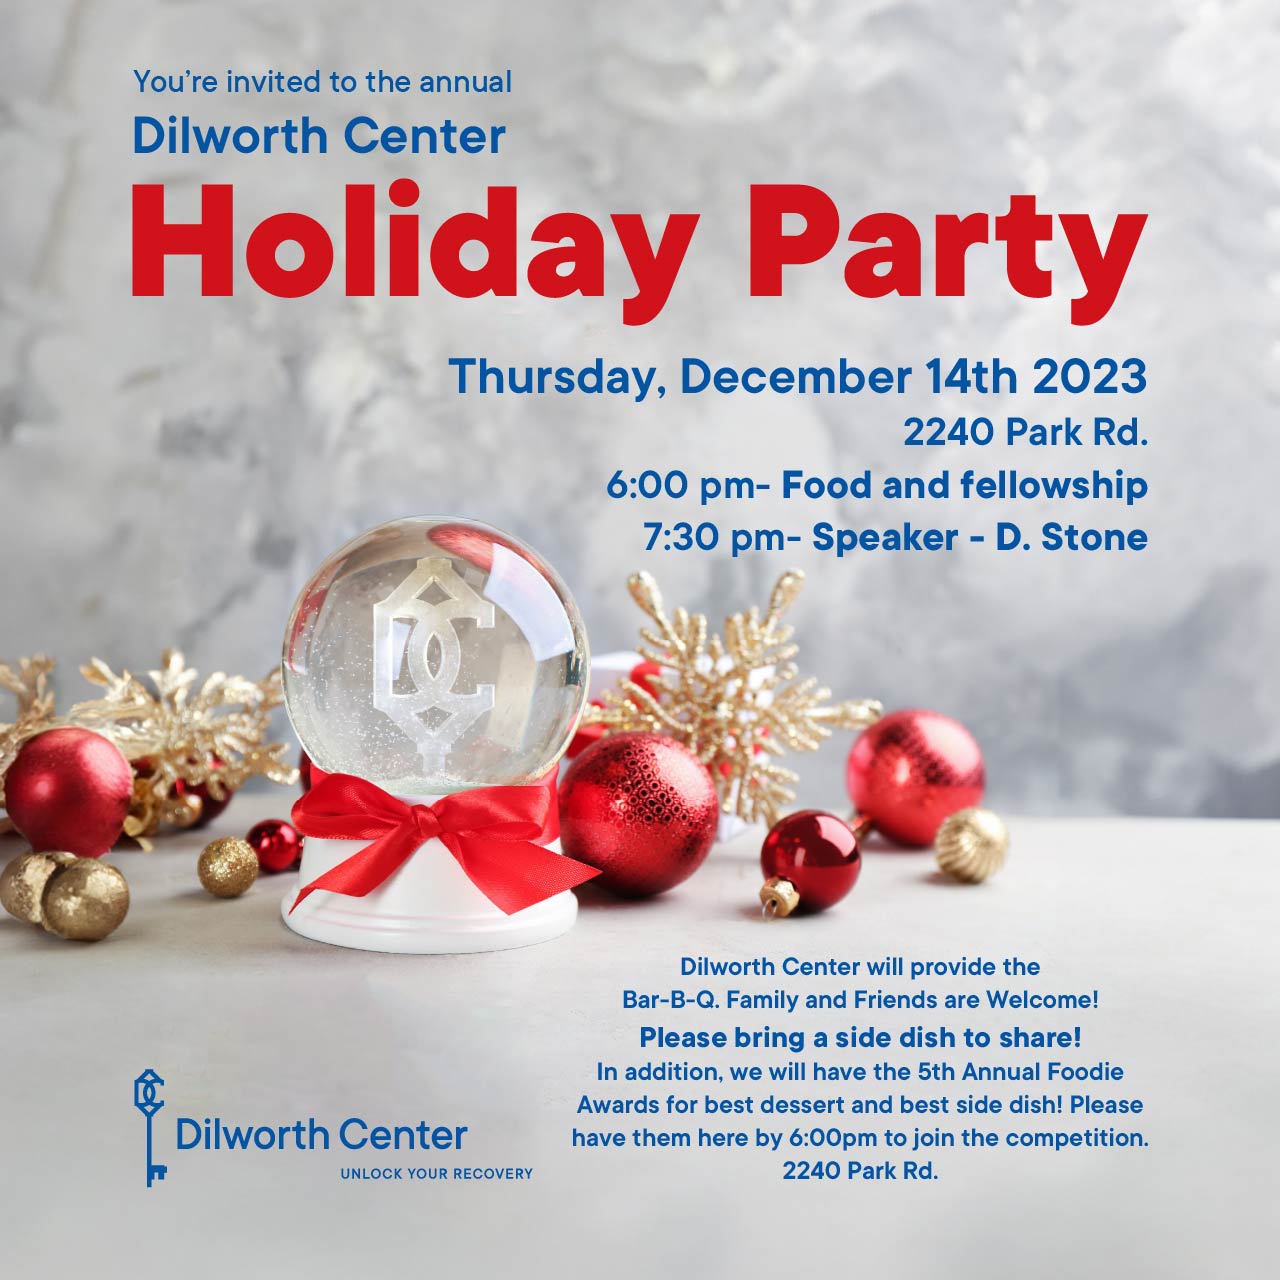 Dilworth Center Holiday Party 2023